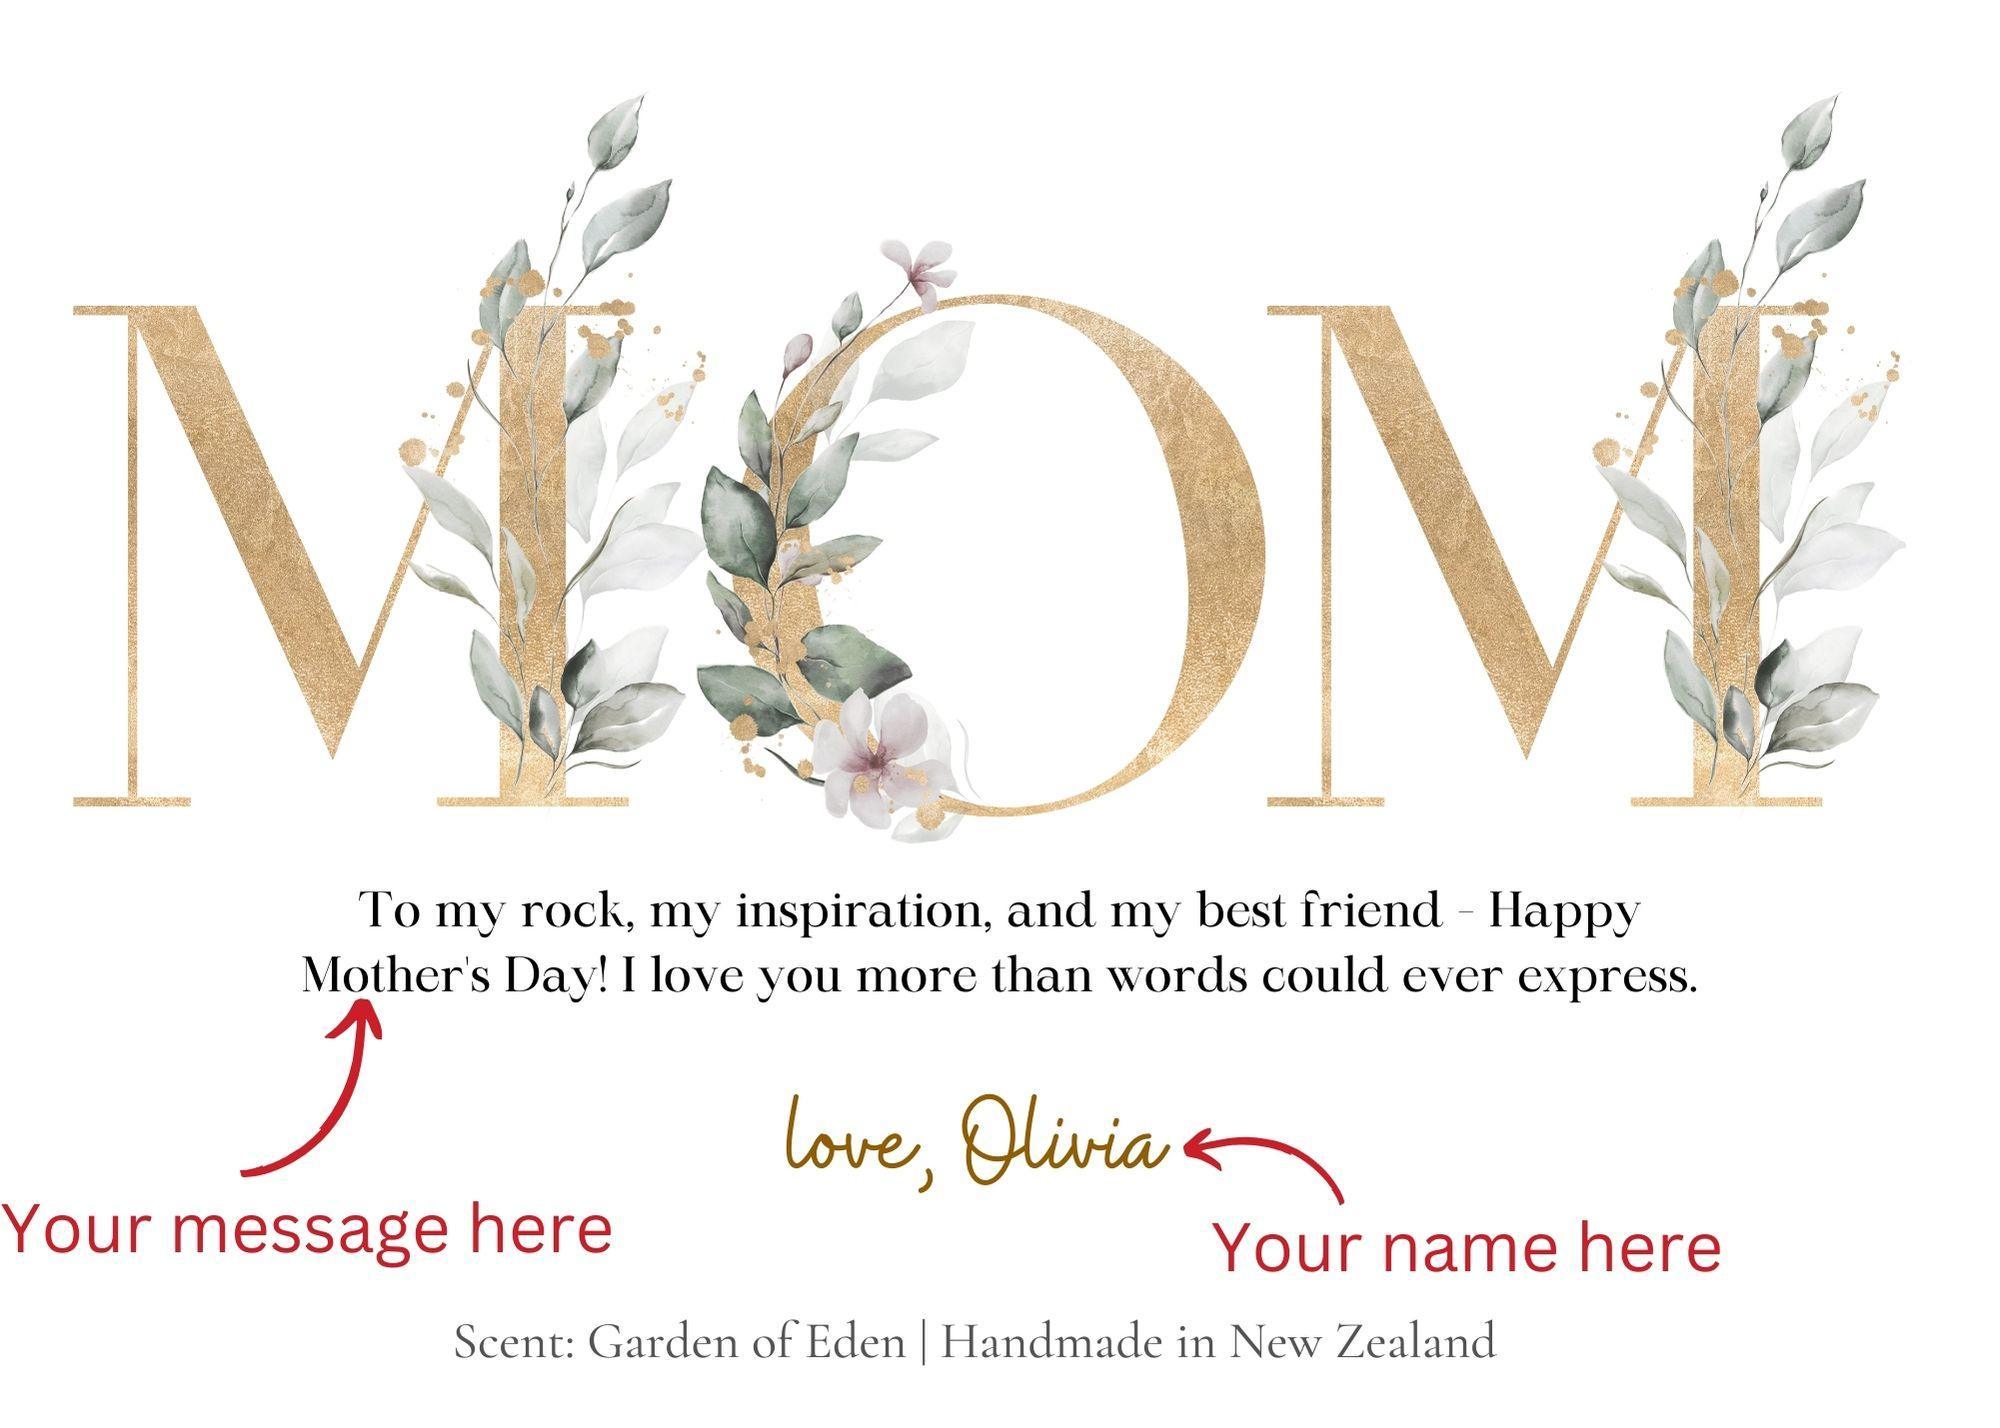 Personalized Gifts for Mom | Famiprints